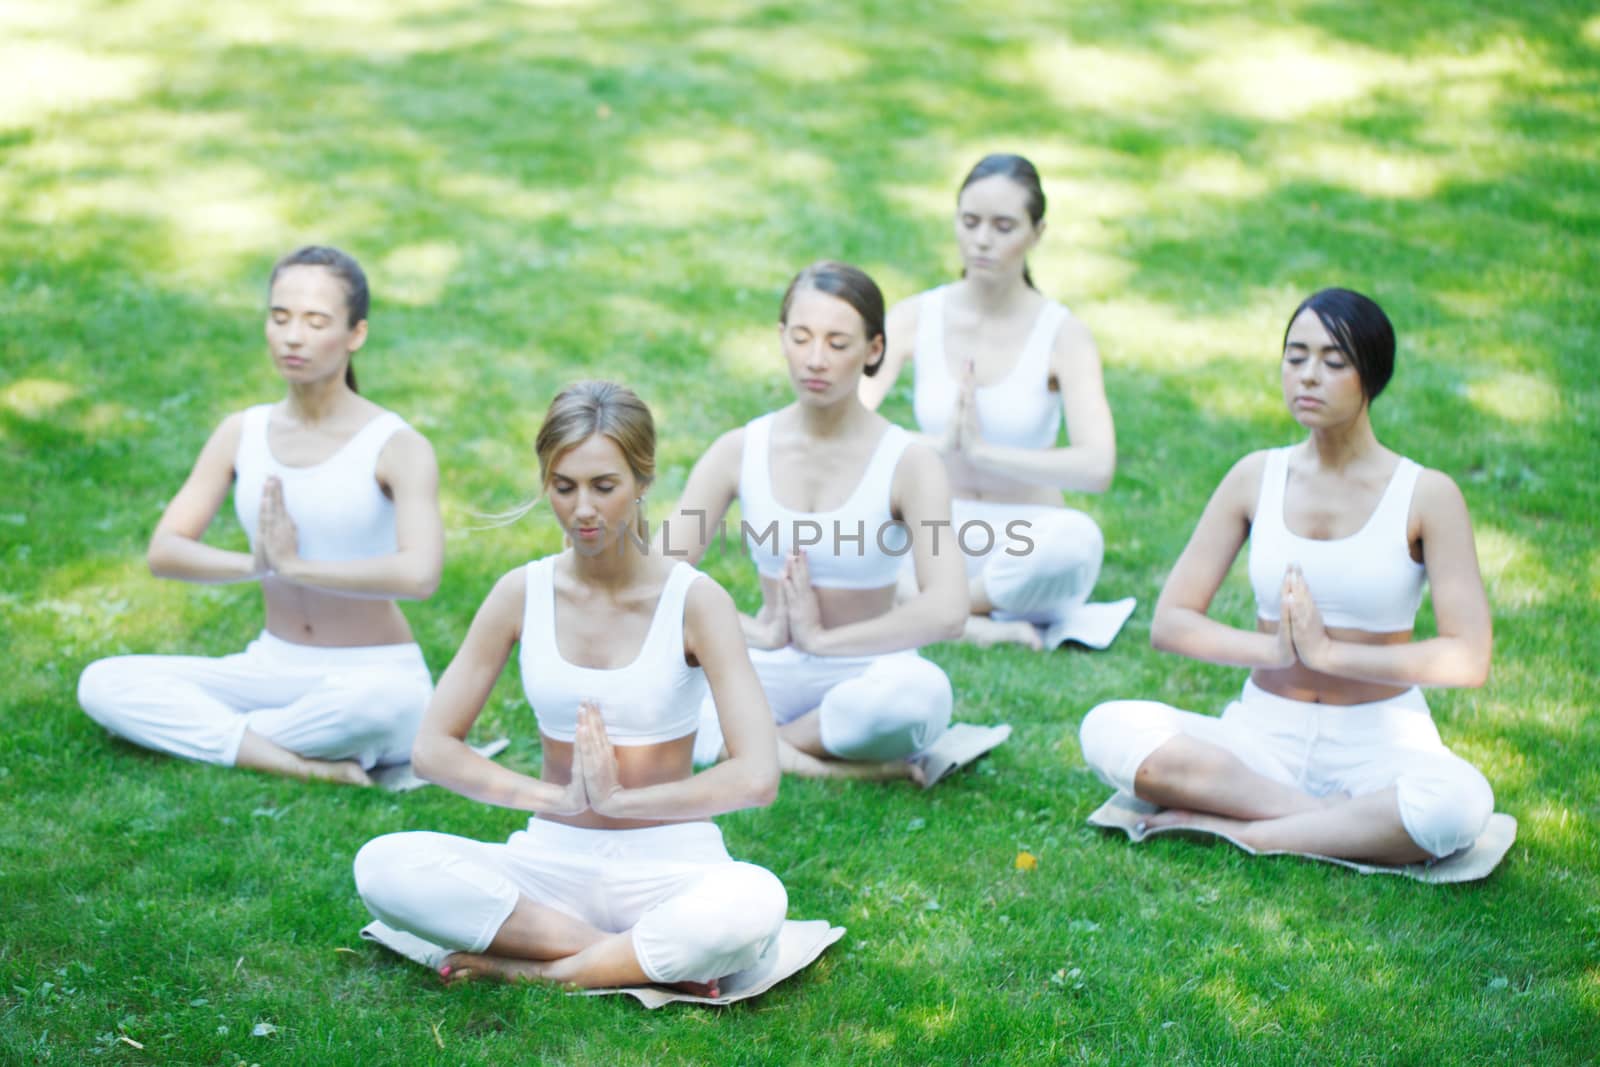 Women in white sportswear sitting in lotus position during group yoga training class at park